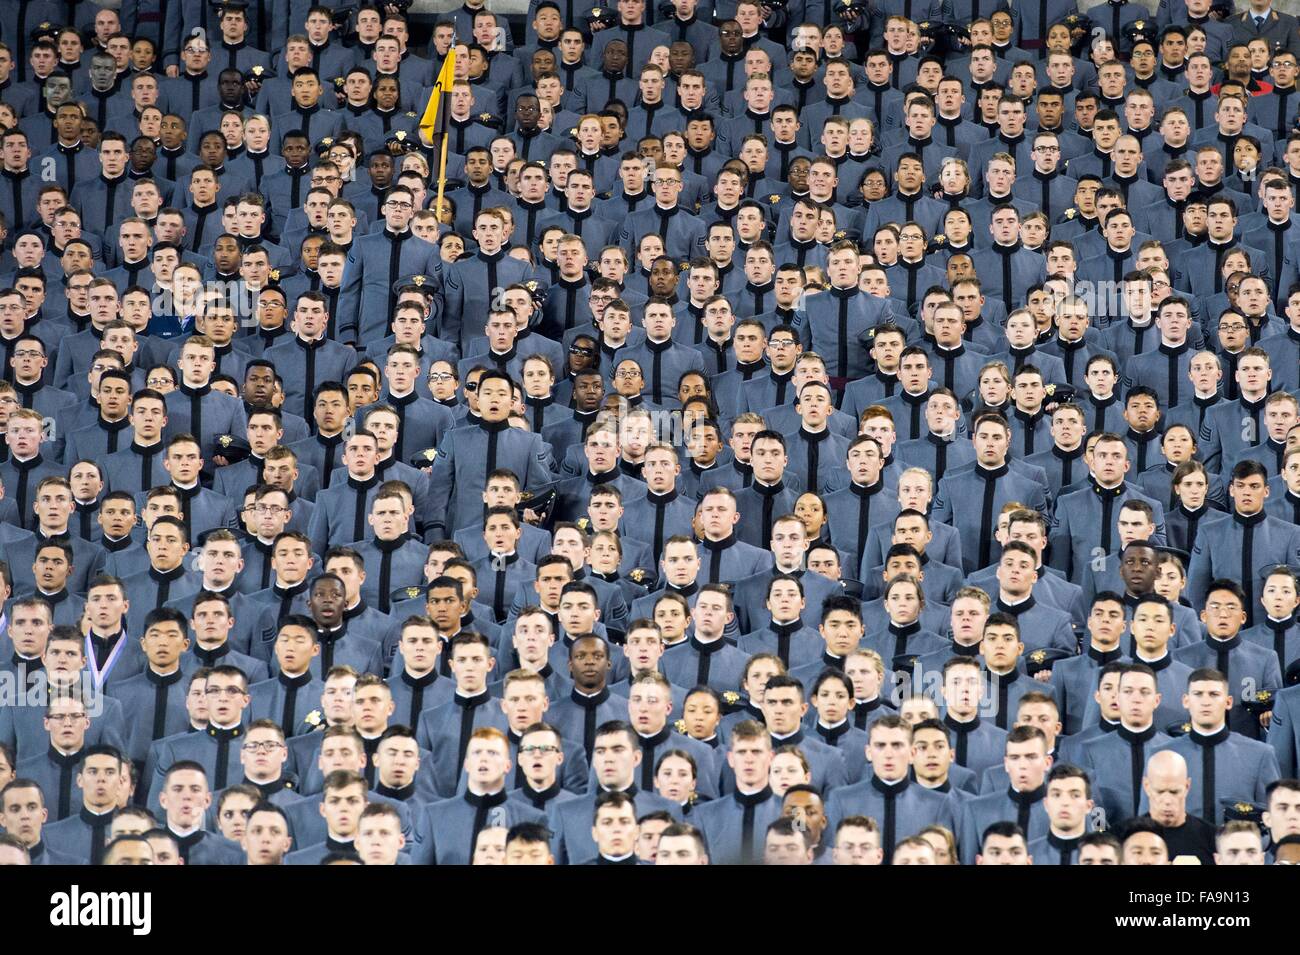 West Point Army cadets cheer for the Army Black Knights during the traditional NCAA football rivalry between the Army Black Knights and the Navy Midshipmen played at Lincoln Financial Field December 12, 2015 in Philadelphia, PA. Stock Photo